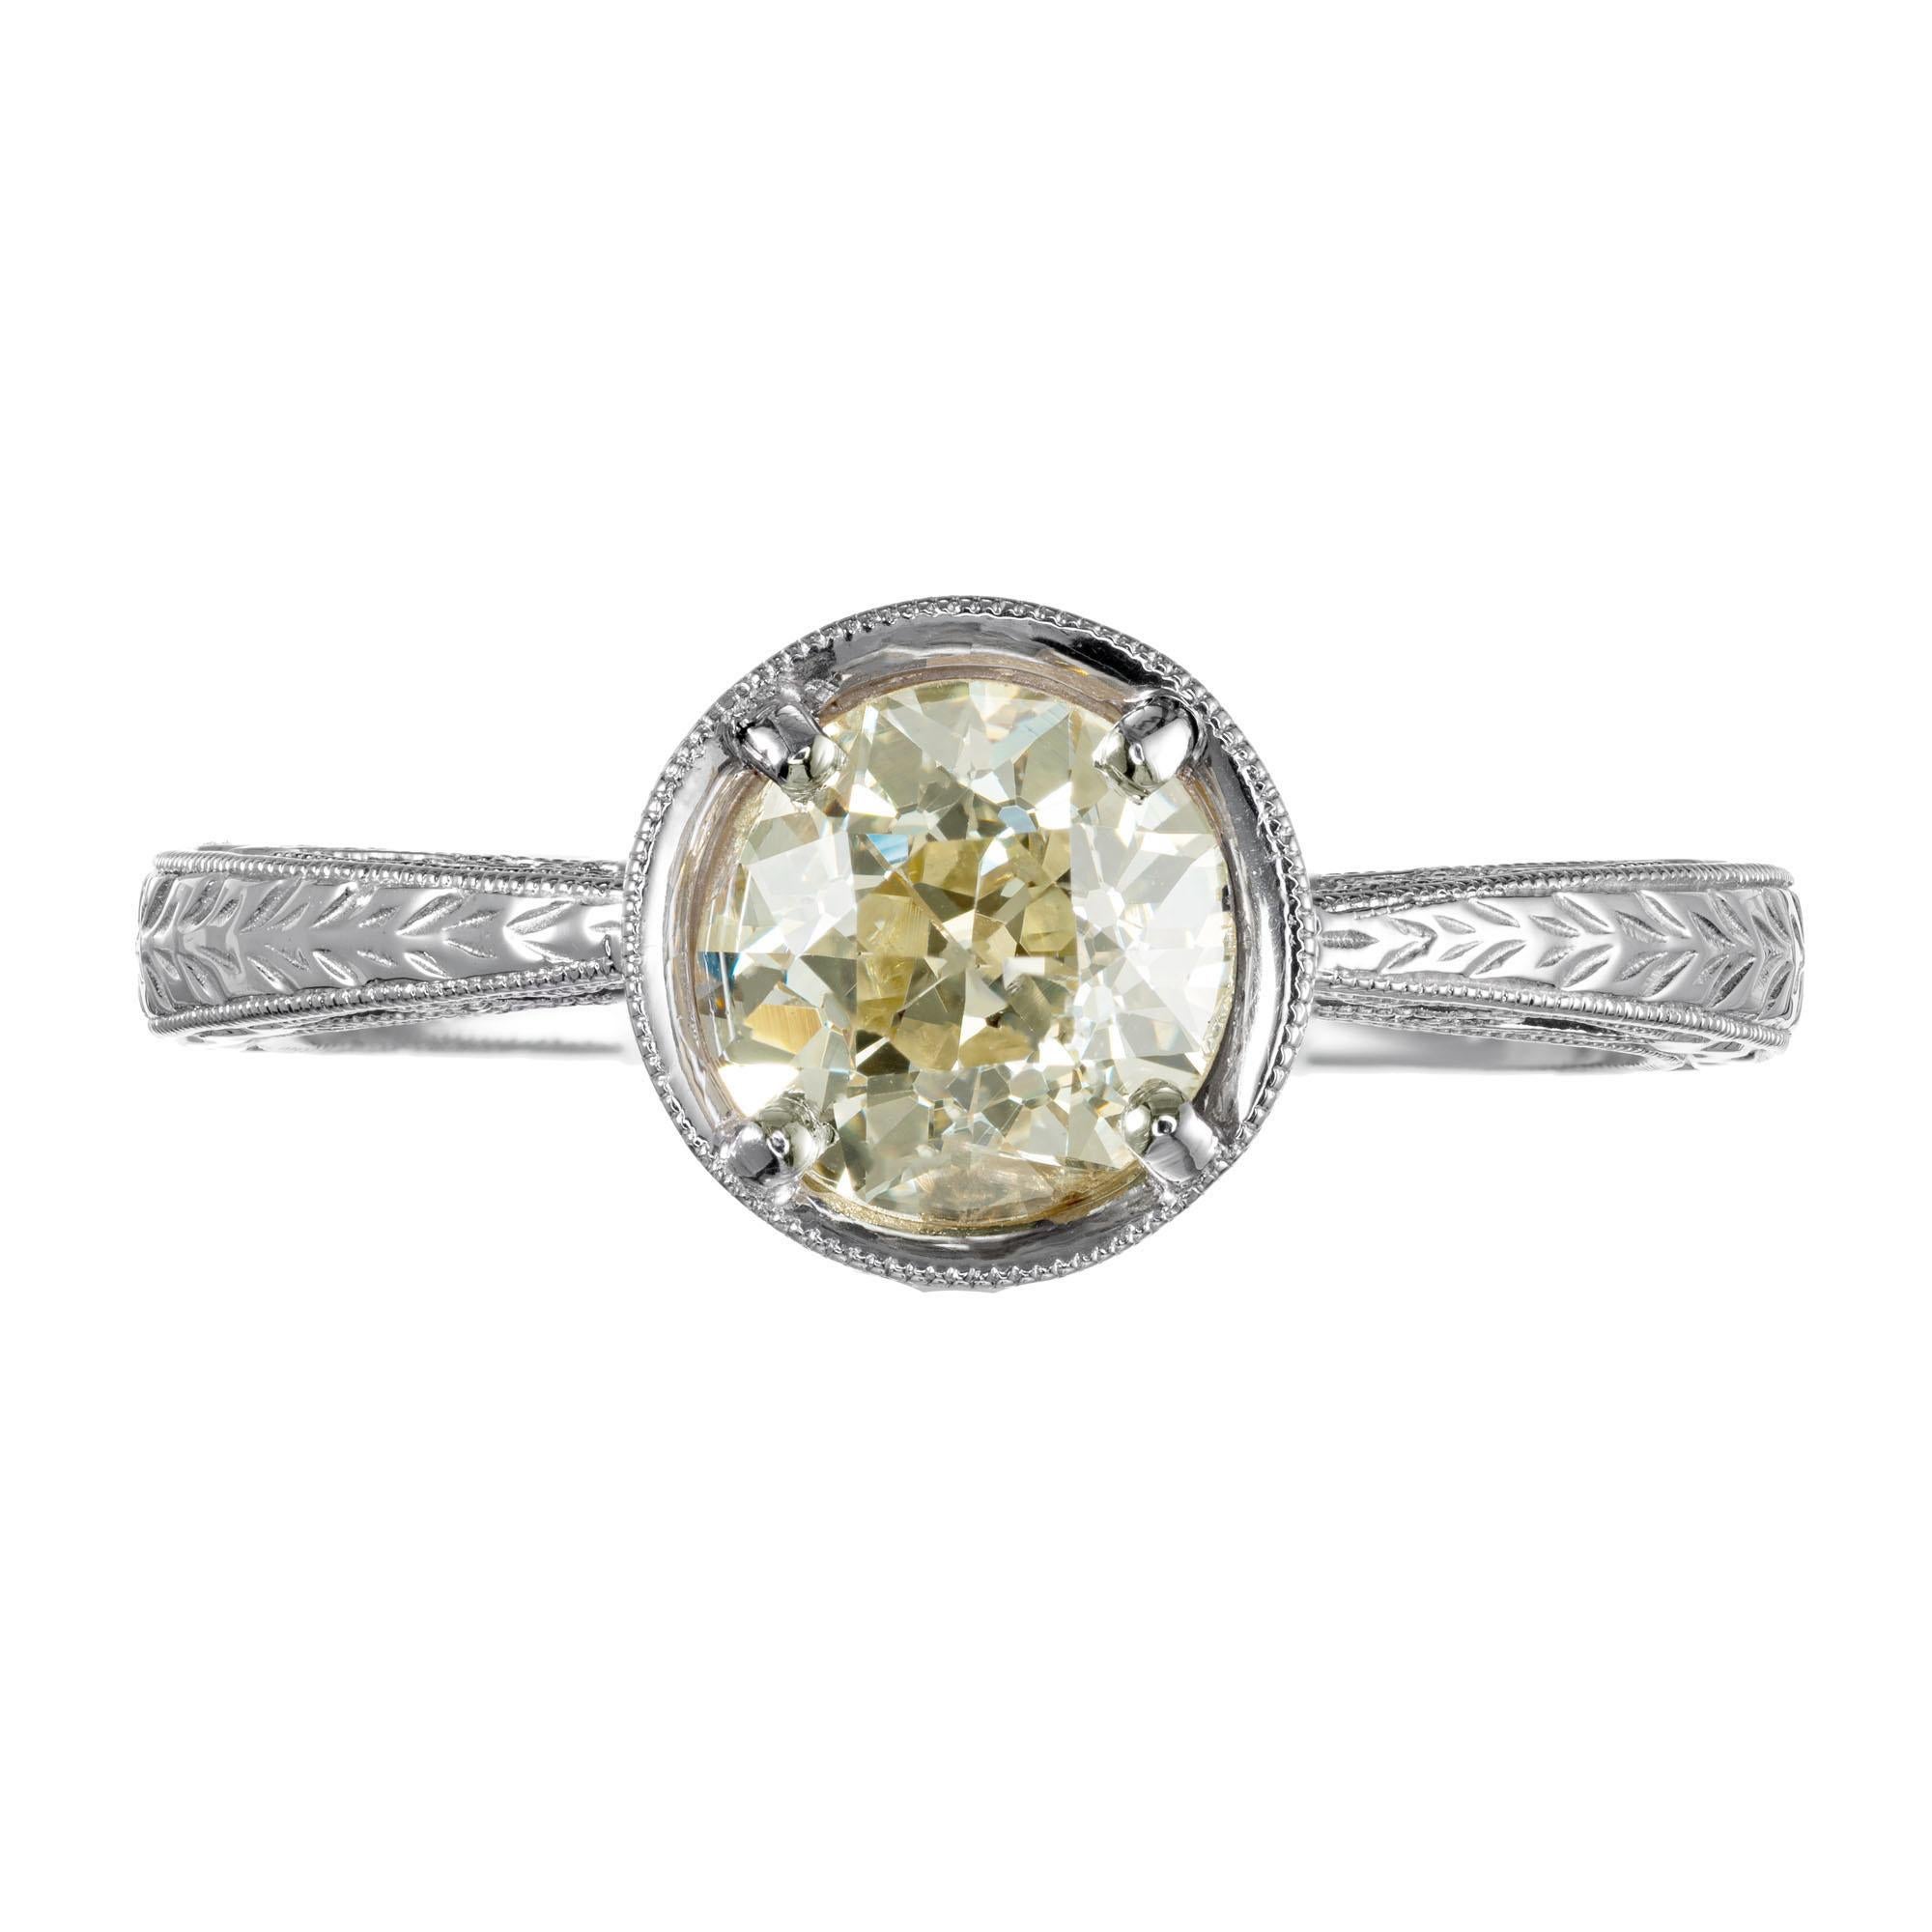 Soft light yellow Old European brilliant cut 1.11 carat diamond engagement ring. Circa 1900. EGL Certified light-yellow W to X natural color with extra sparkle from the raised crown and small table on the Old European center stone, in a 14k white